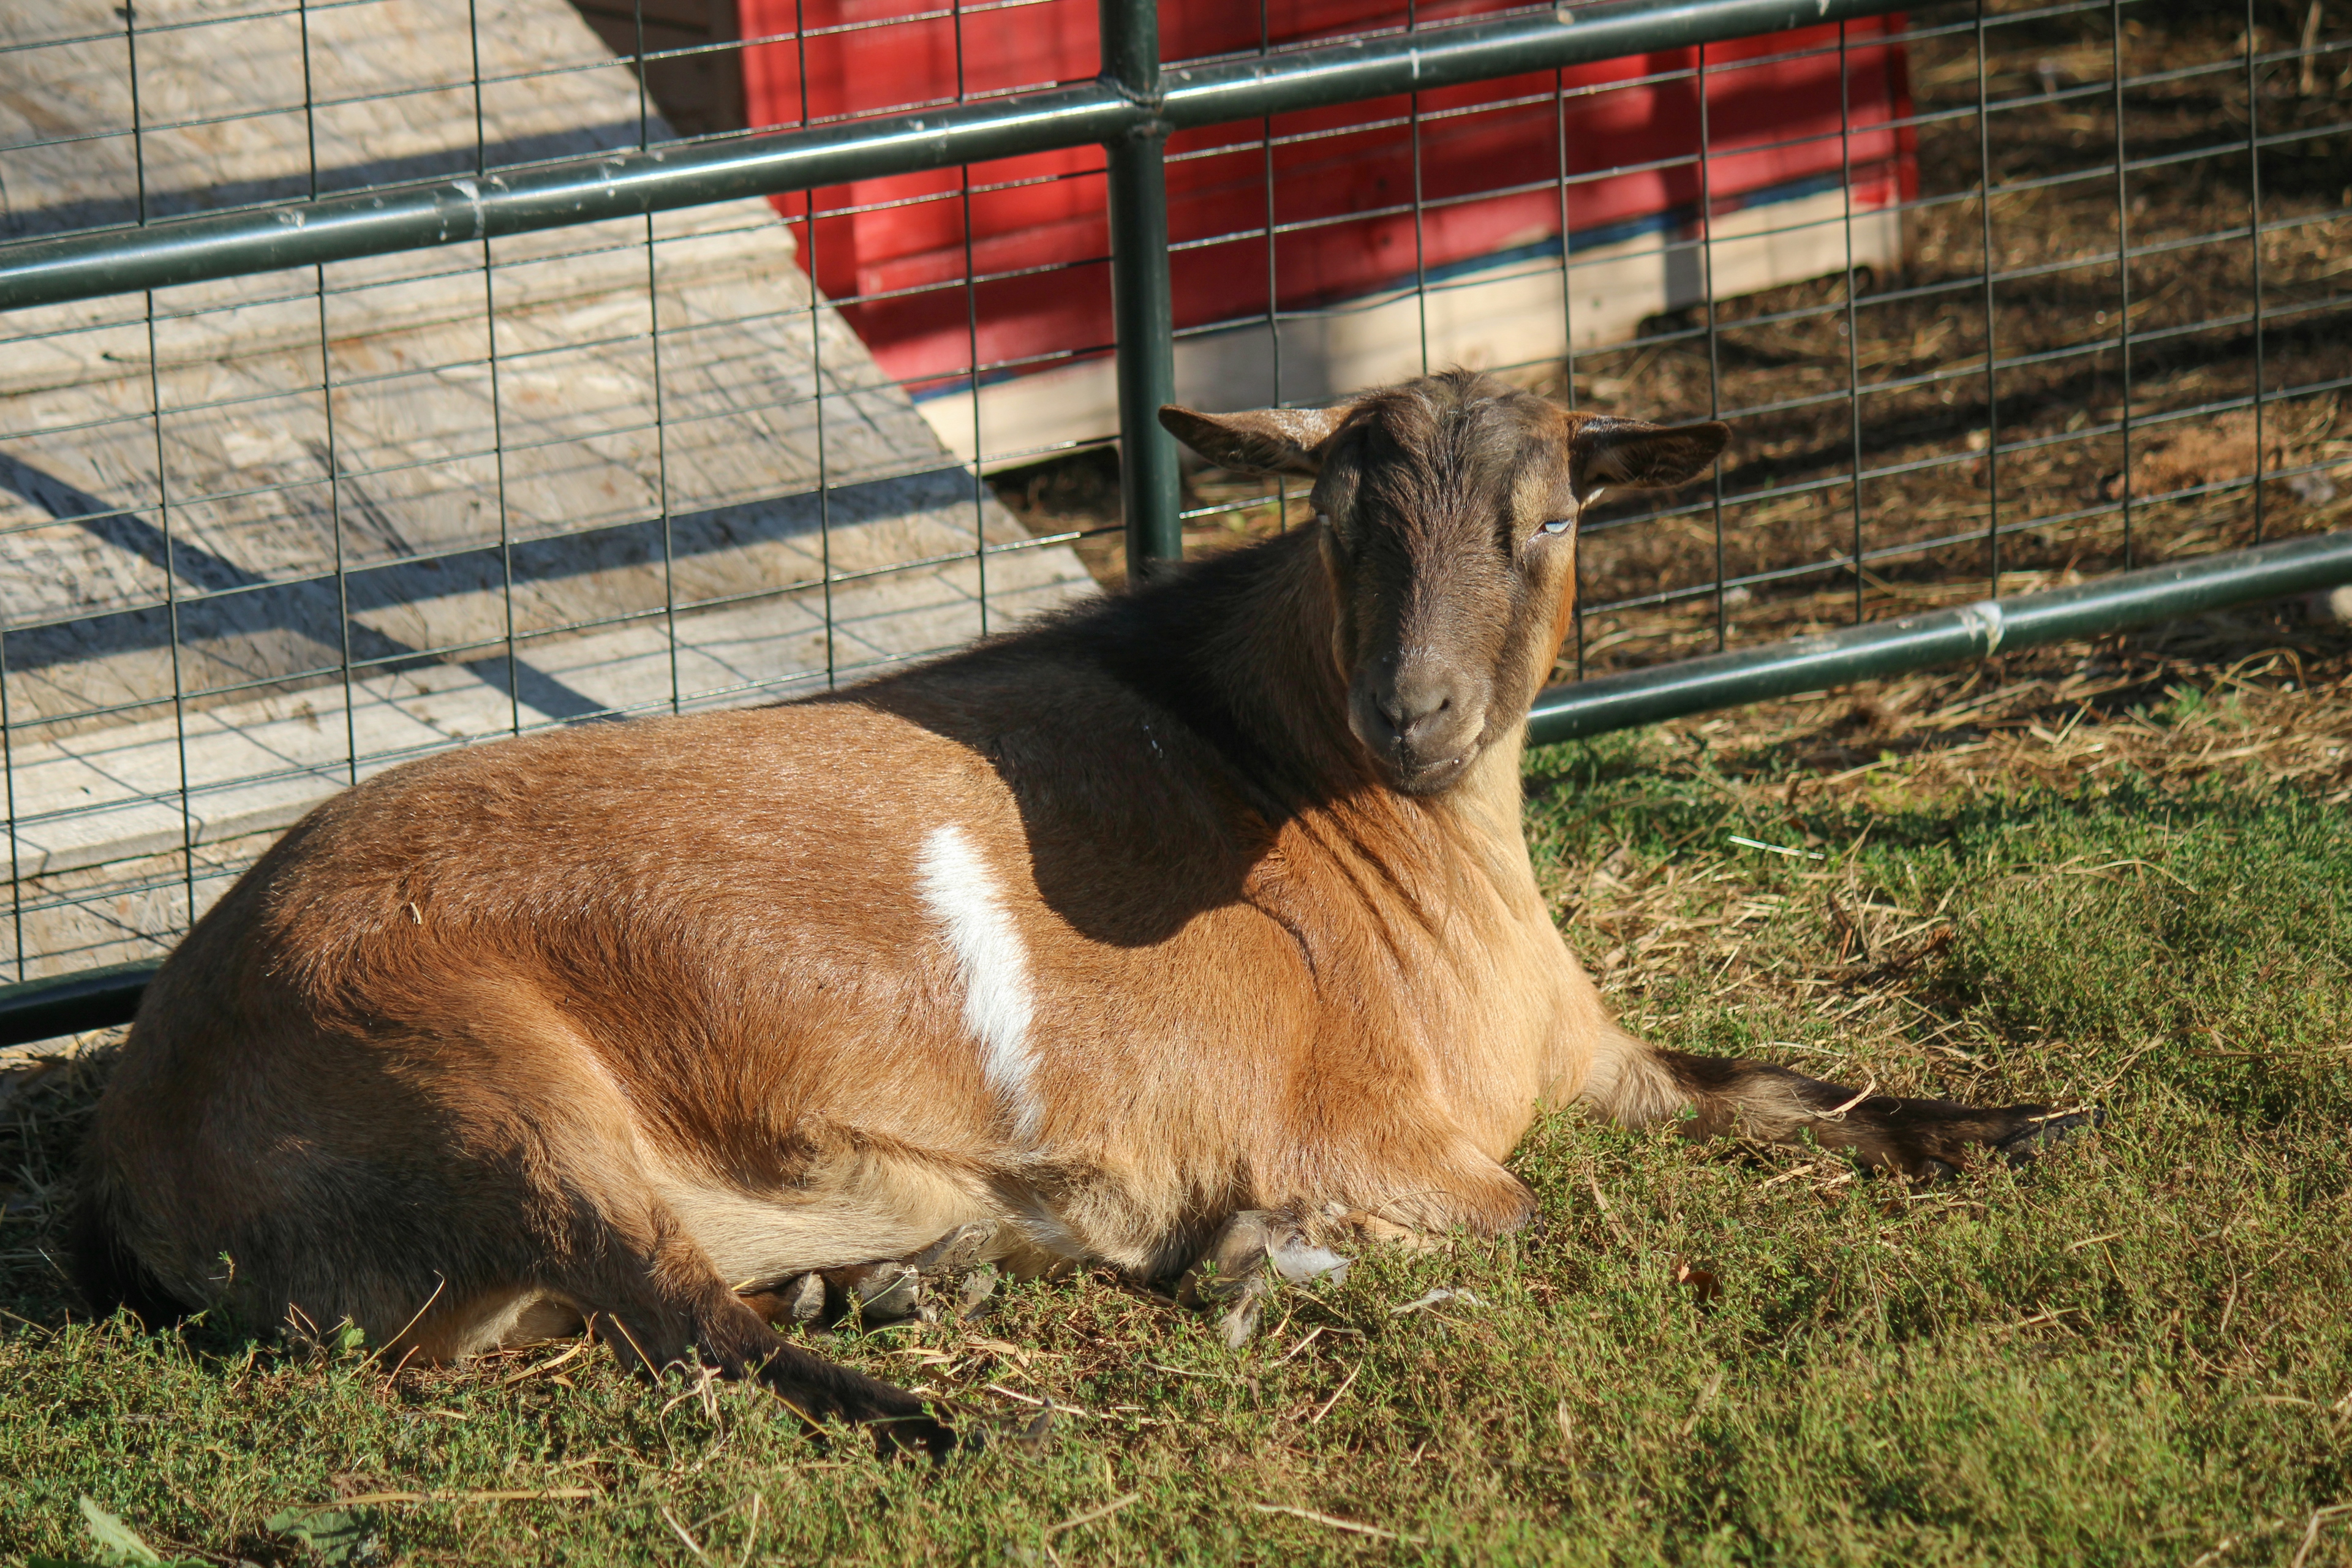 a pygmy goat in an enclosure